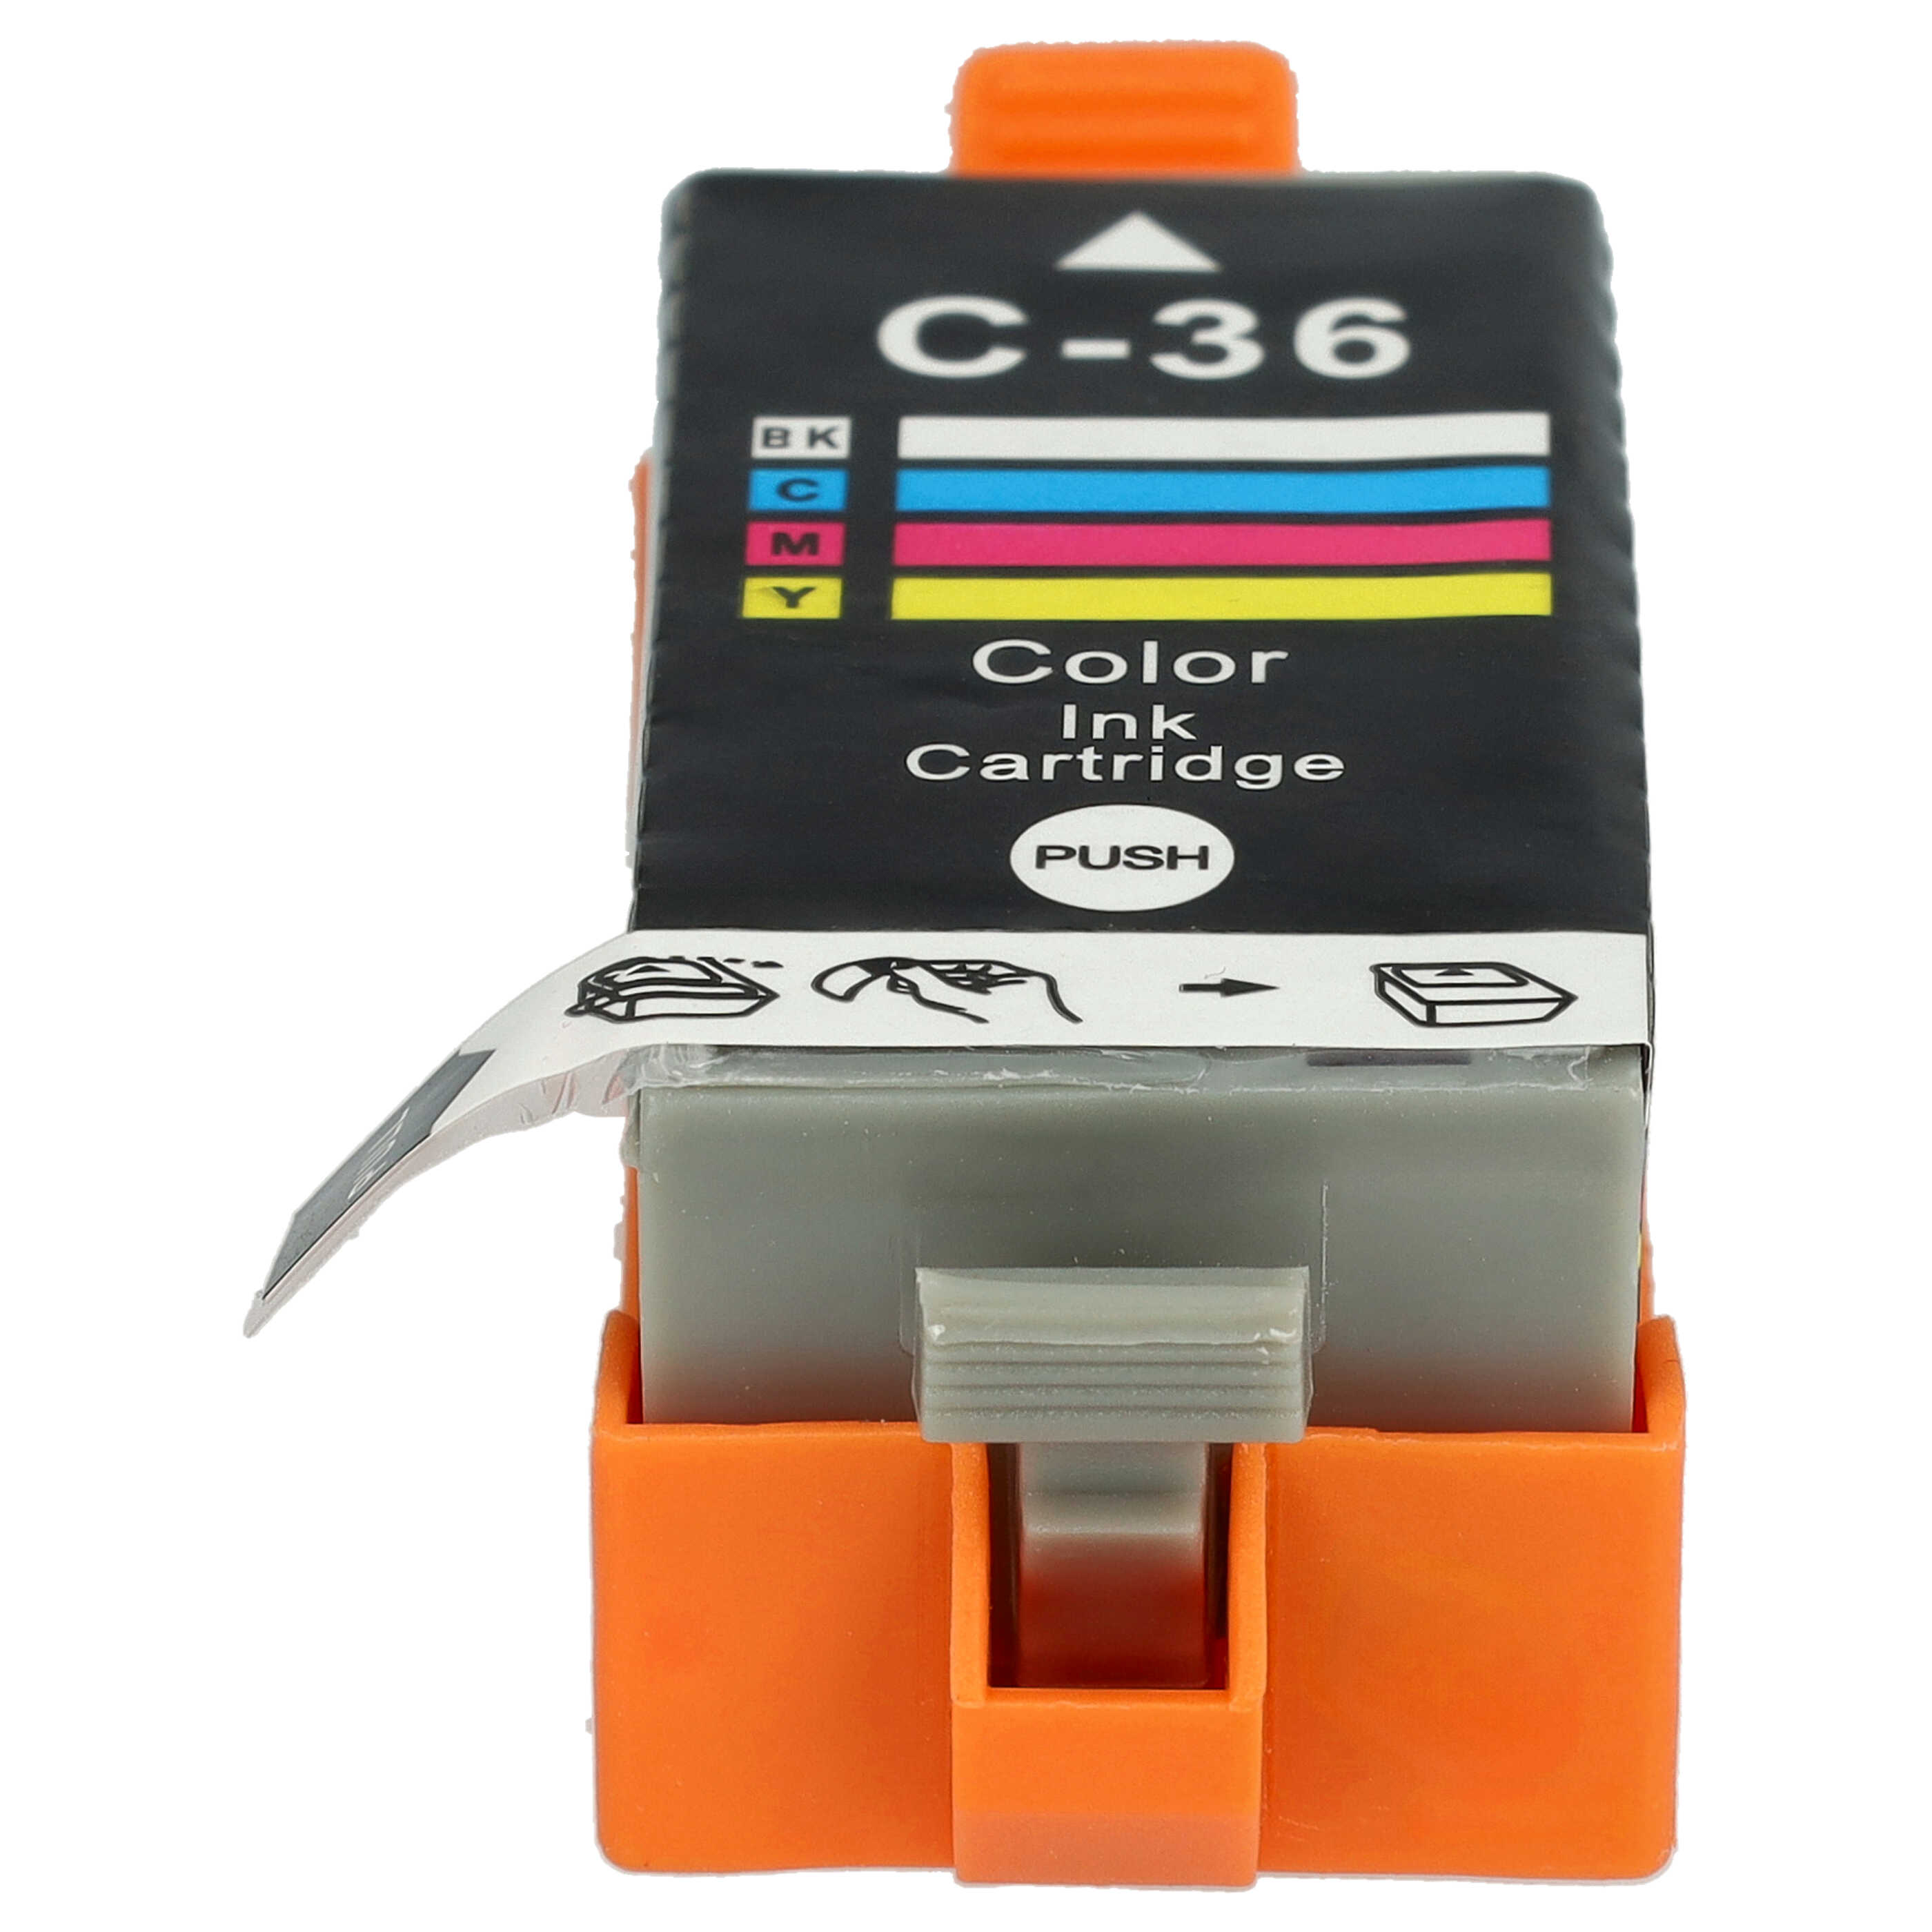 Ink Cartridge as Exchange for Canon CLI-36, CLI-36C for Canon Printer - B/C/M/Y 13 ml